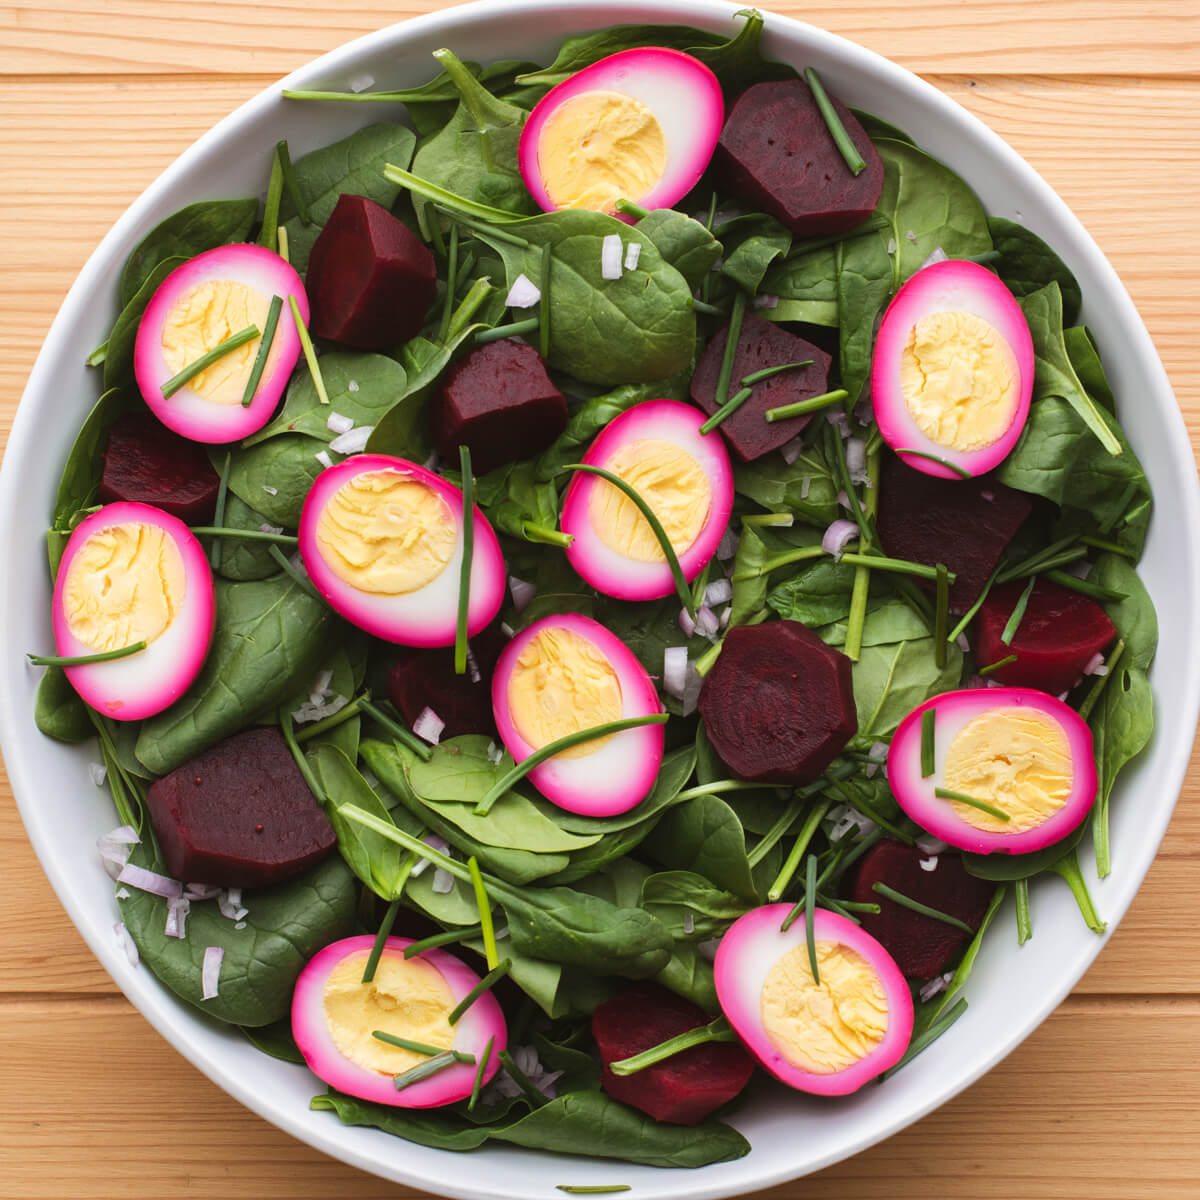 A white salad bowl filled with pickled beets, bright pink eggs and spinach salad